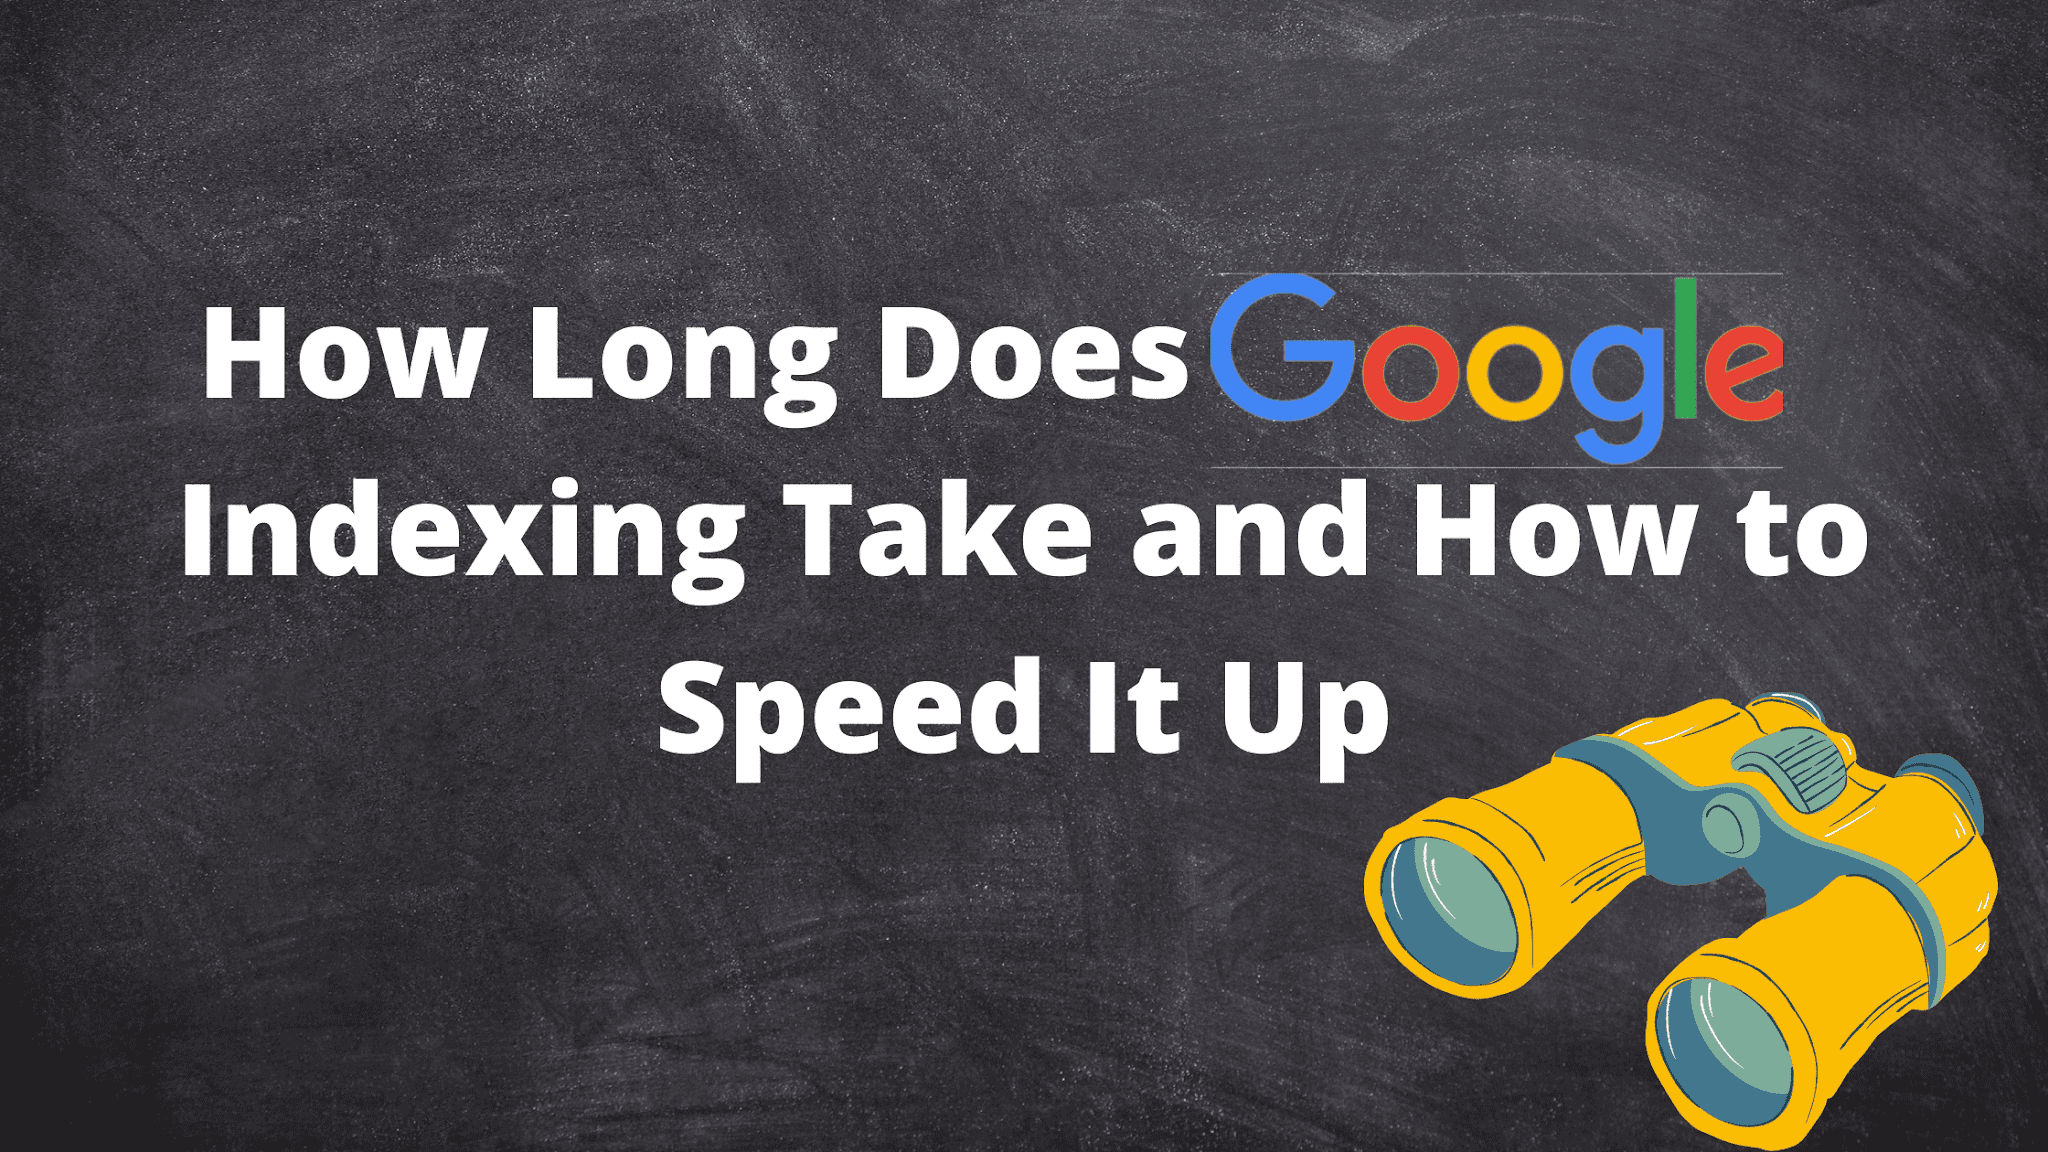 How Long Does Google Indexing Take and How to Speed It Up